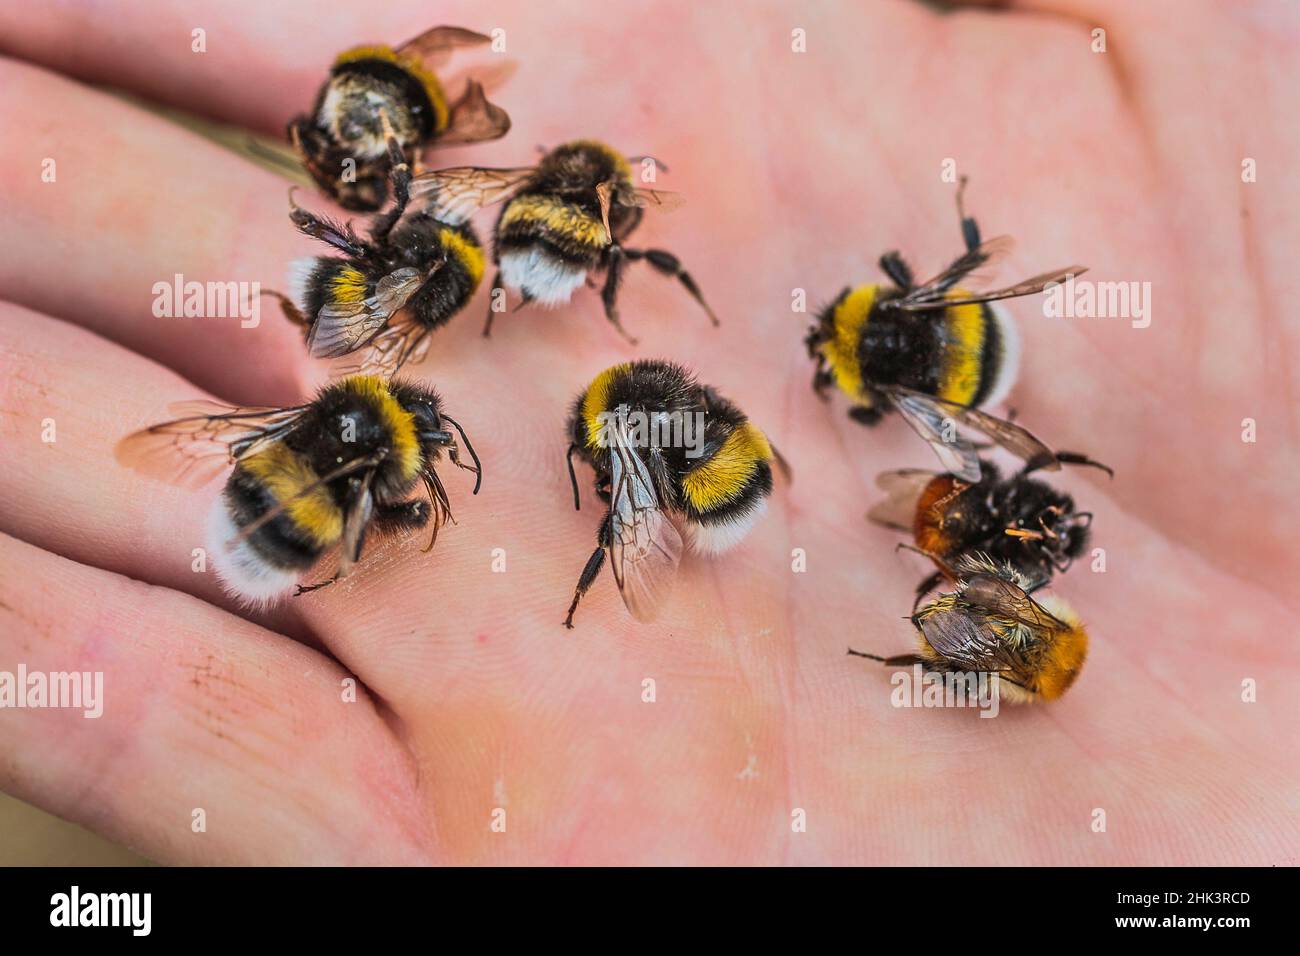 Hand holding bumblebees found dead. Depletion syndrome, toxic nectar or neonicotinoid? Stock Photo